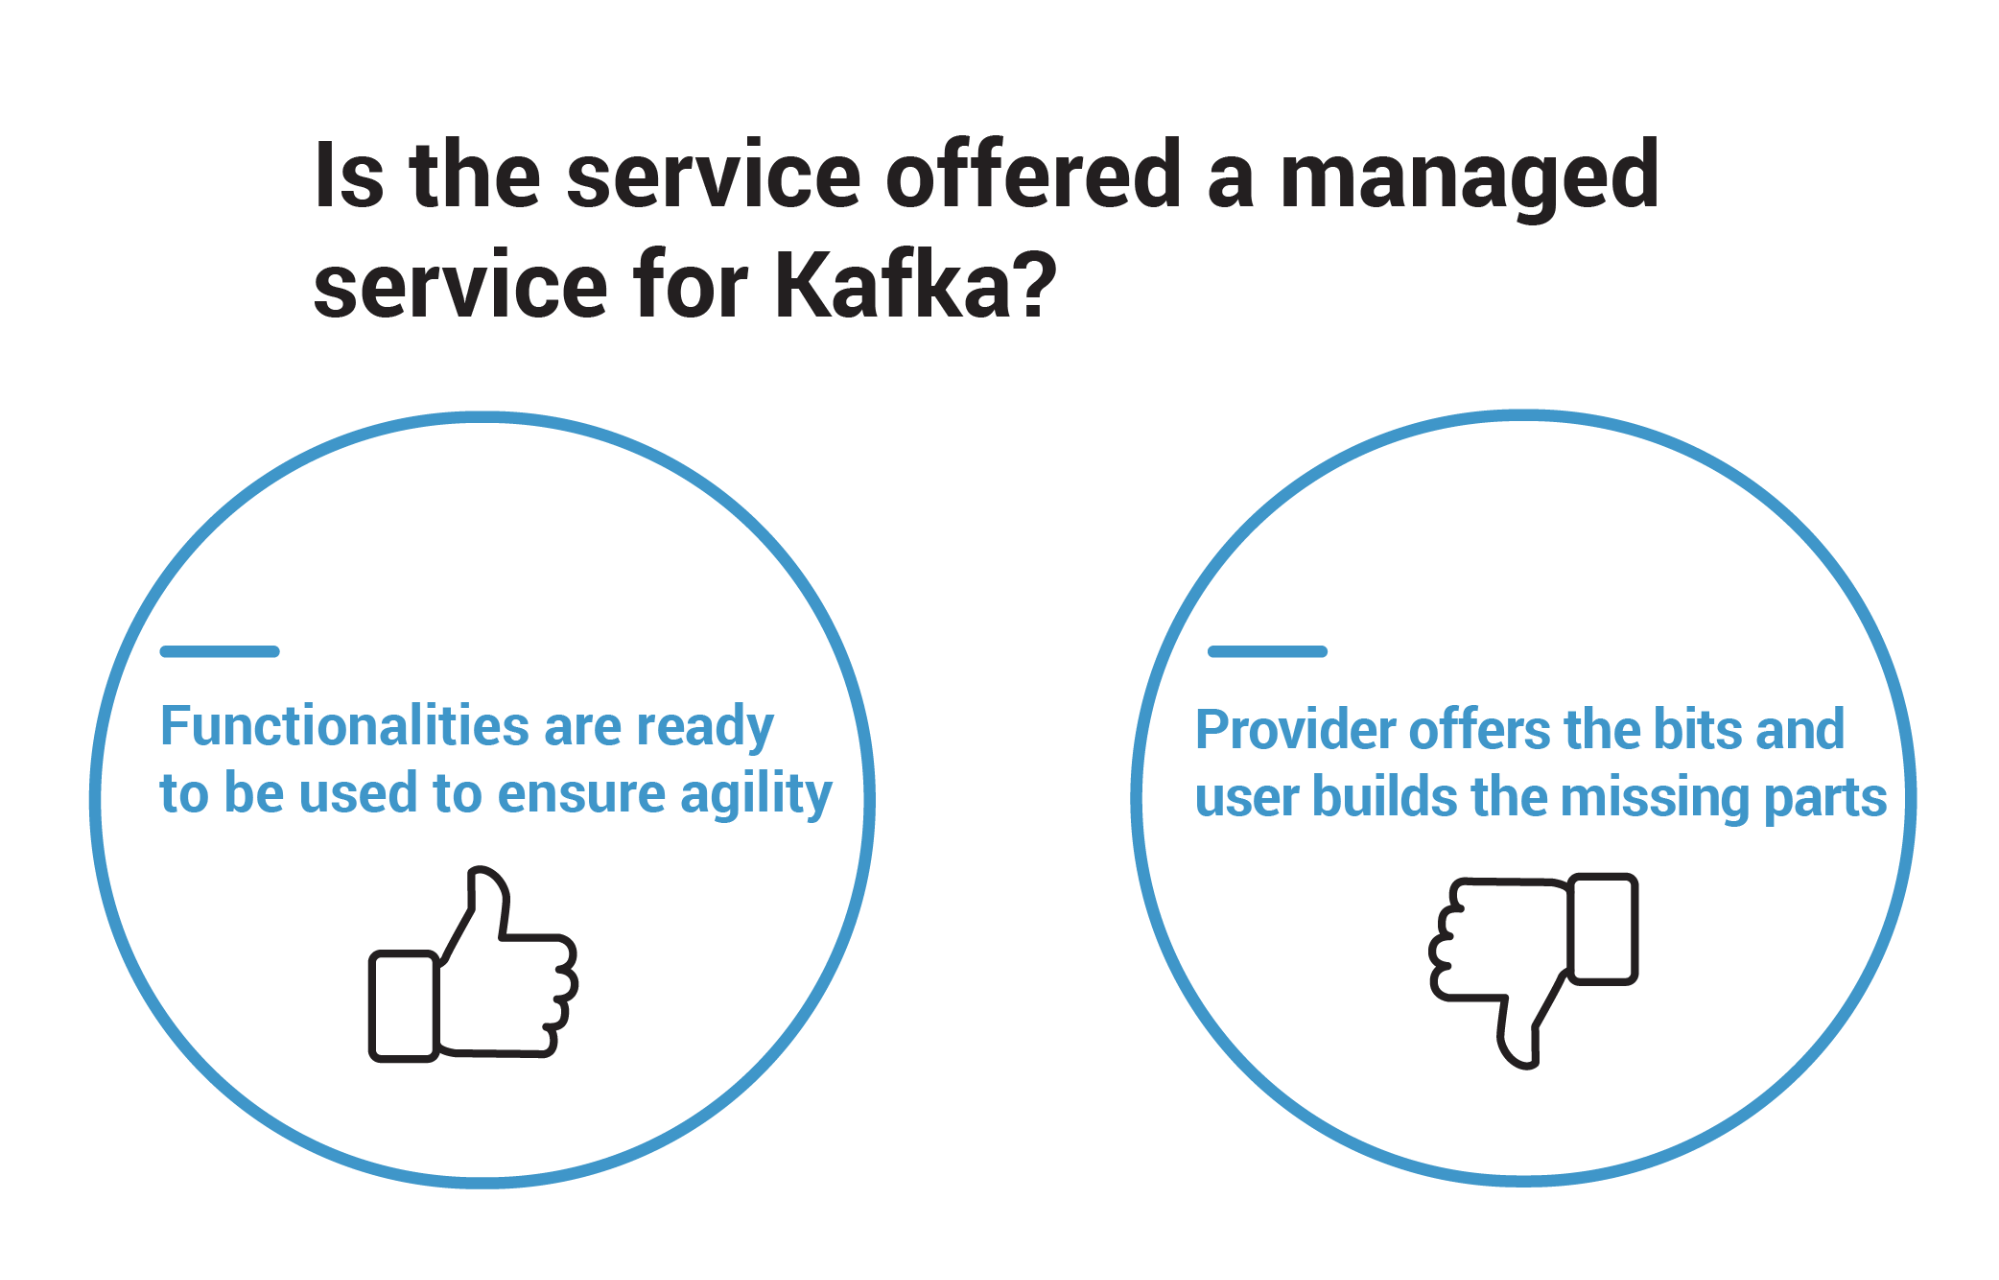 Is the service offered a managed service for Kafka?